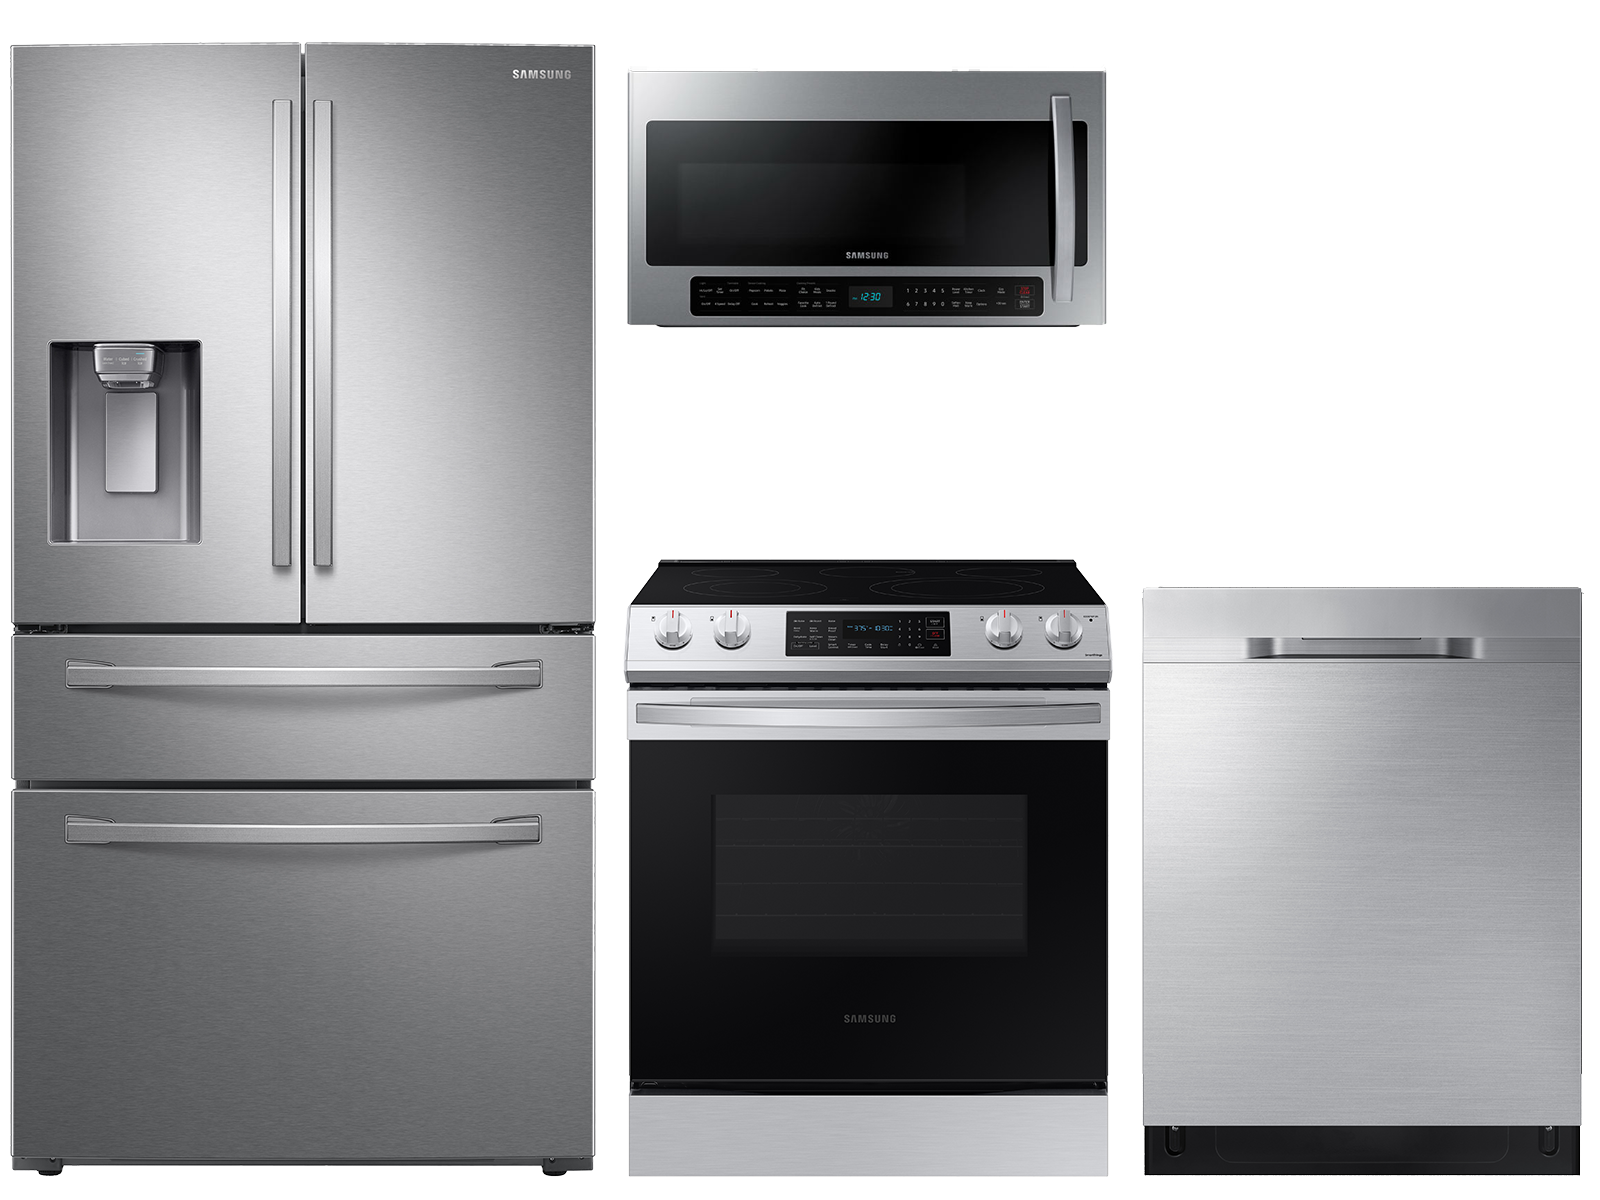 23 cu. ft. counter depth 4-door refrigerator, 6.3 cu. ft. electric range, 2.1 cu. ft. microwave and 48 dBA  dishwasher package